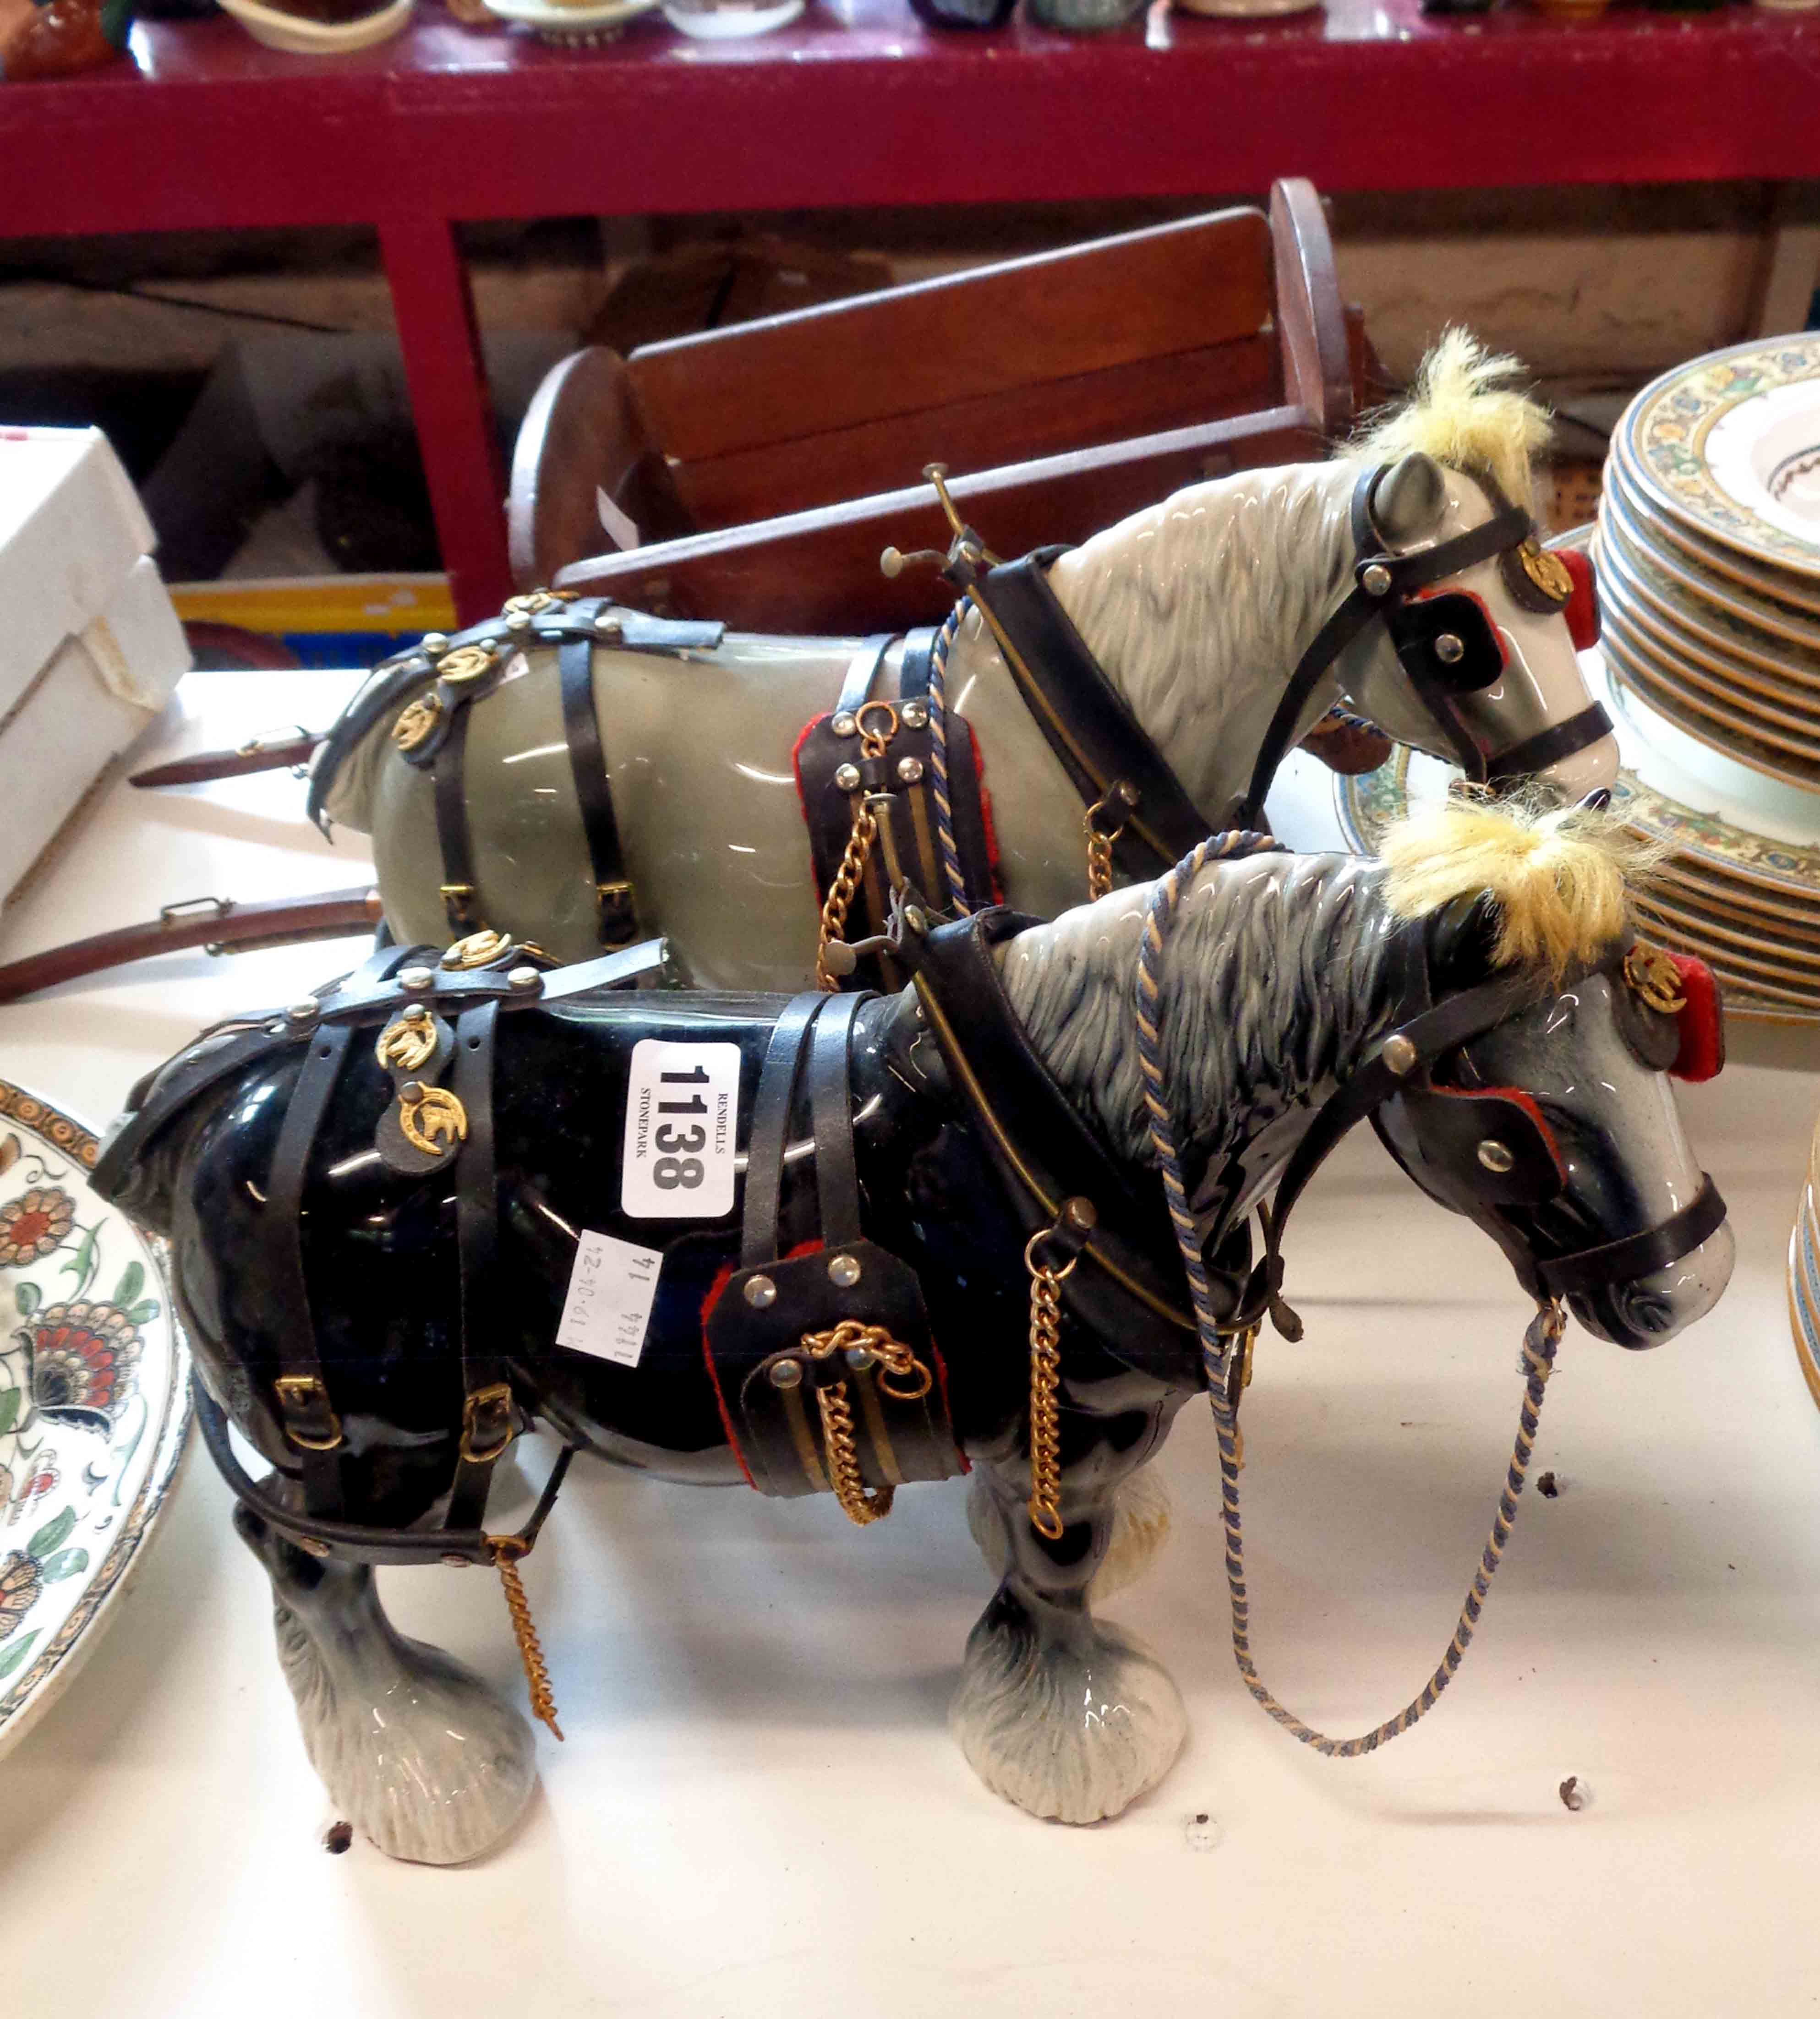 Two ceramic cart horse figurines with horse brass straps and tack - sold with a wooden cart